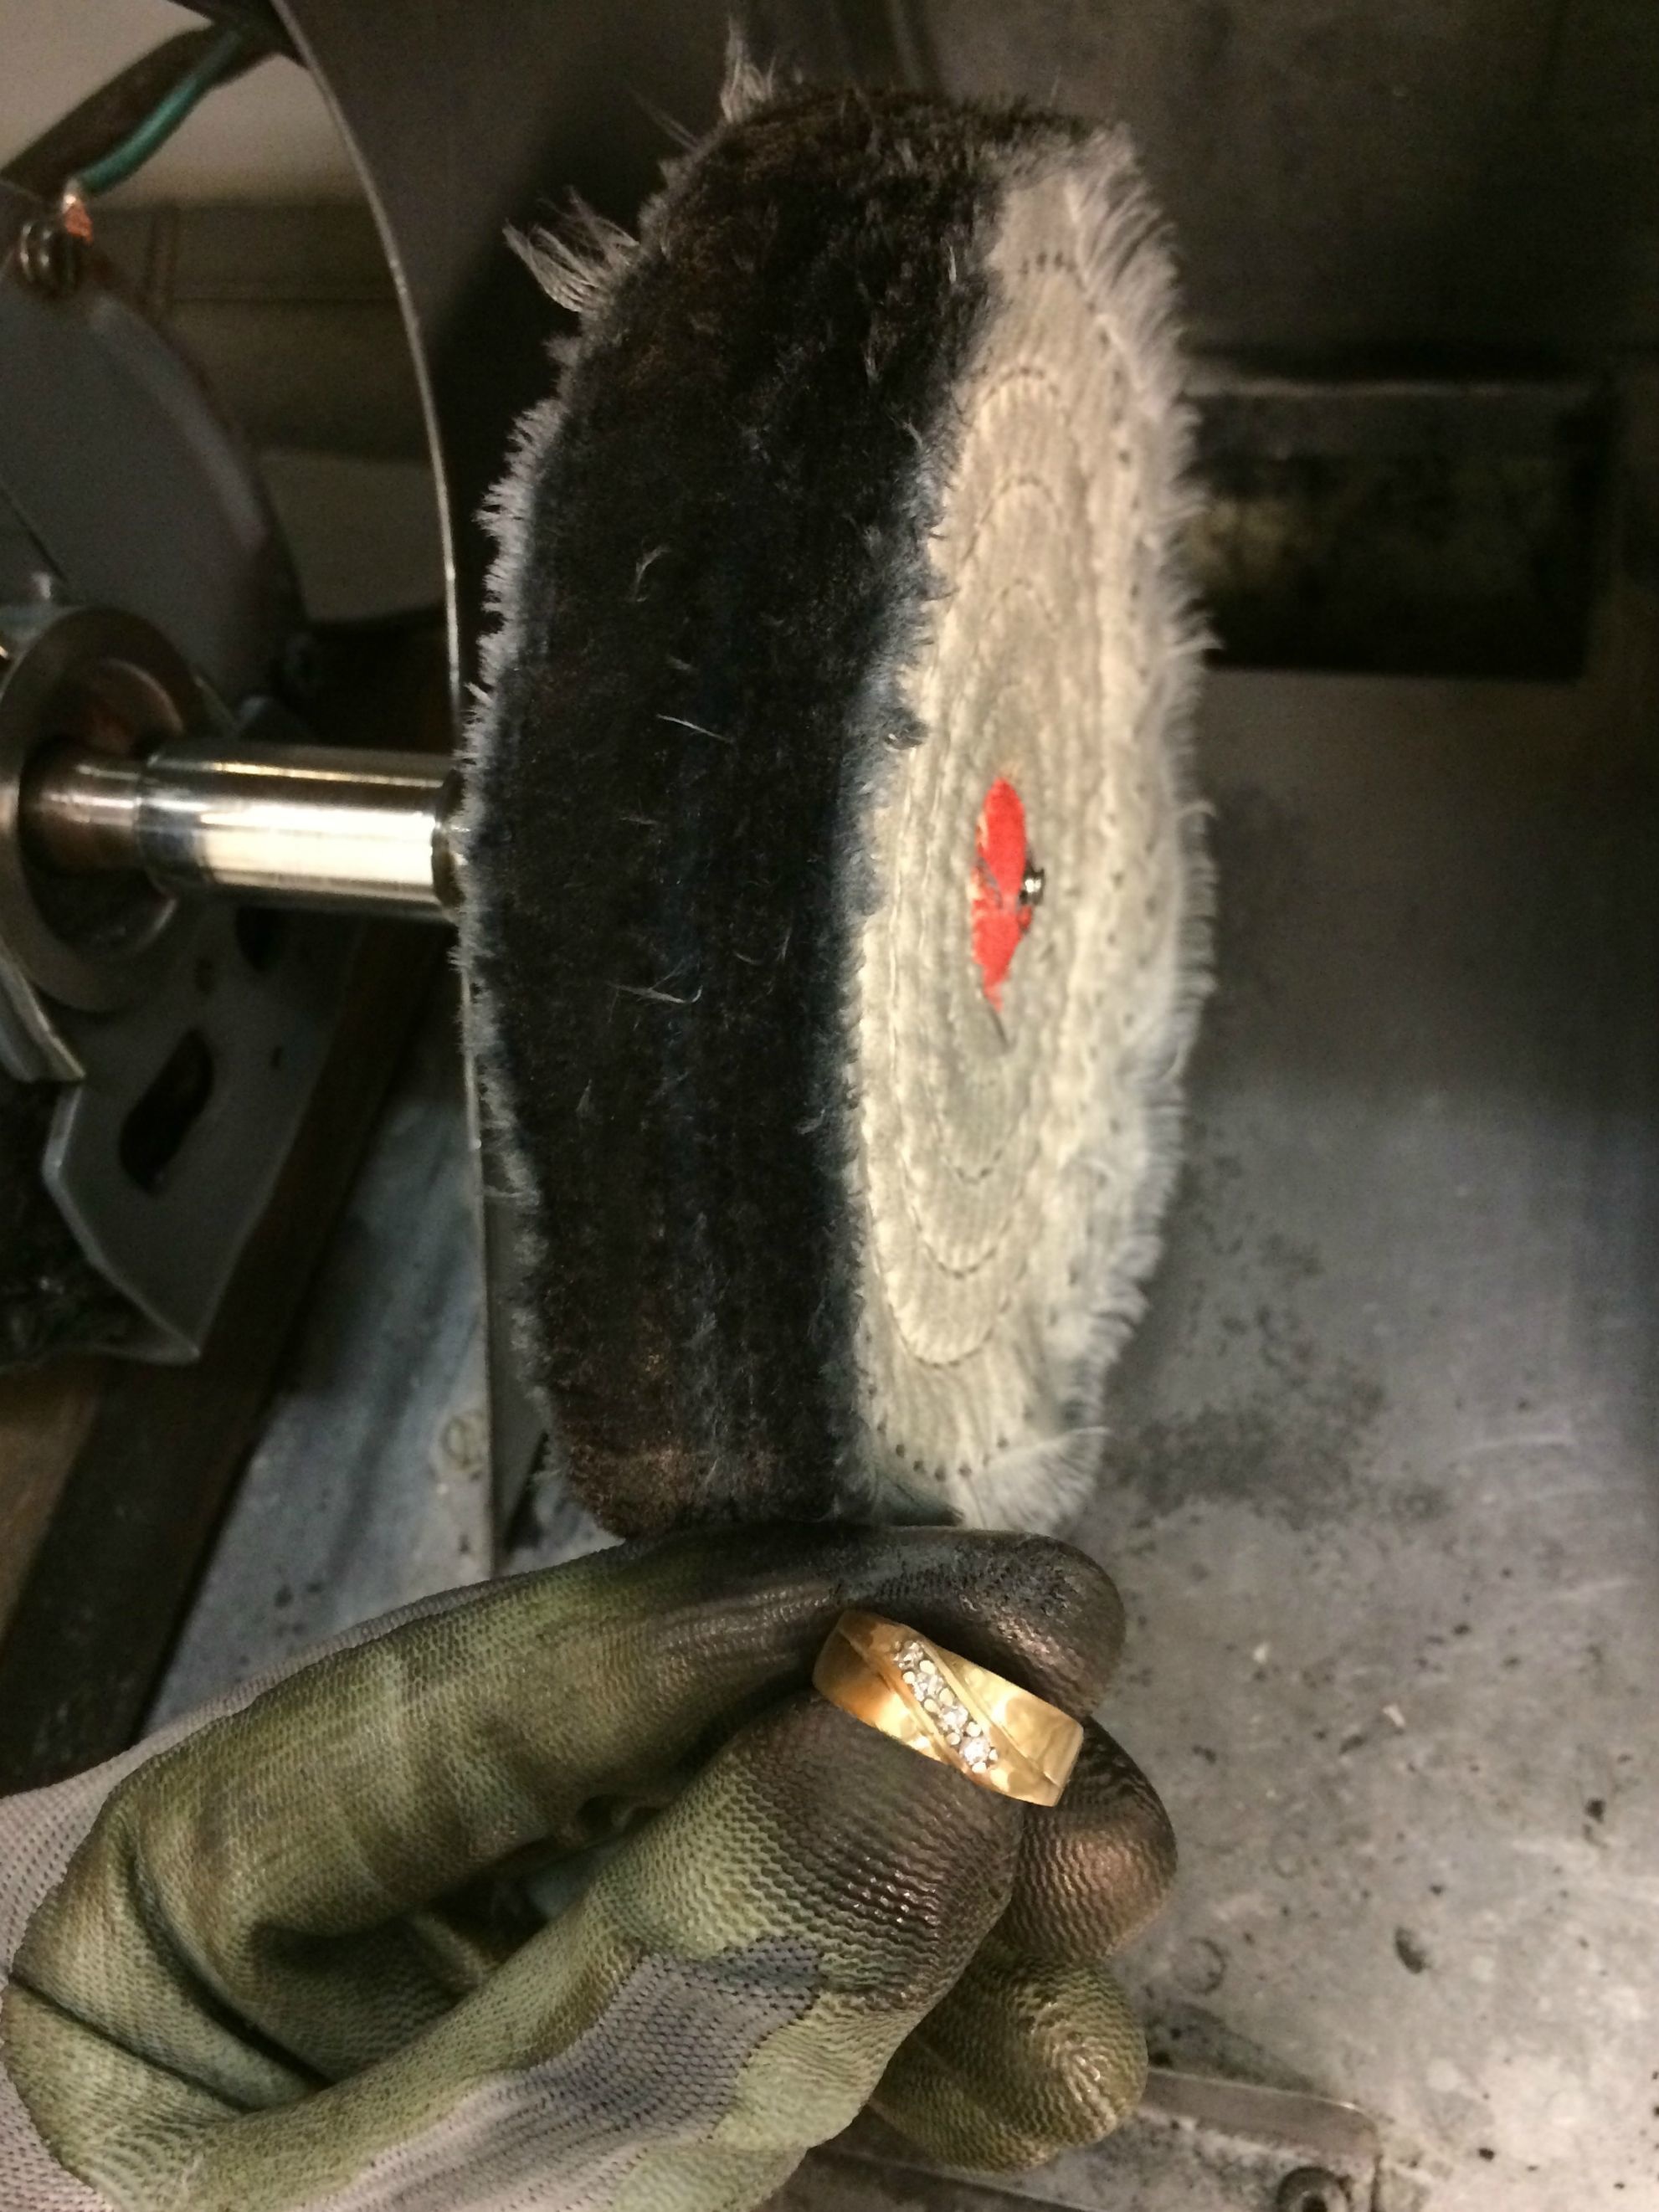 Then, the buffing wheel returns the ring to its former glory.